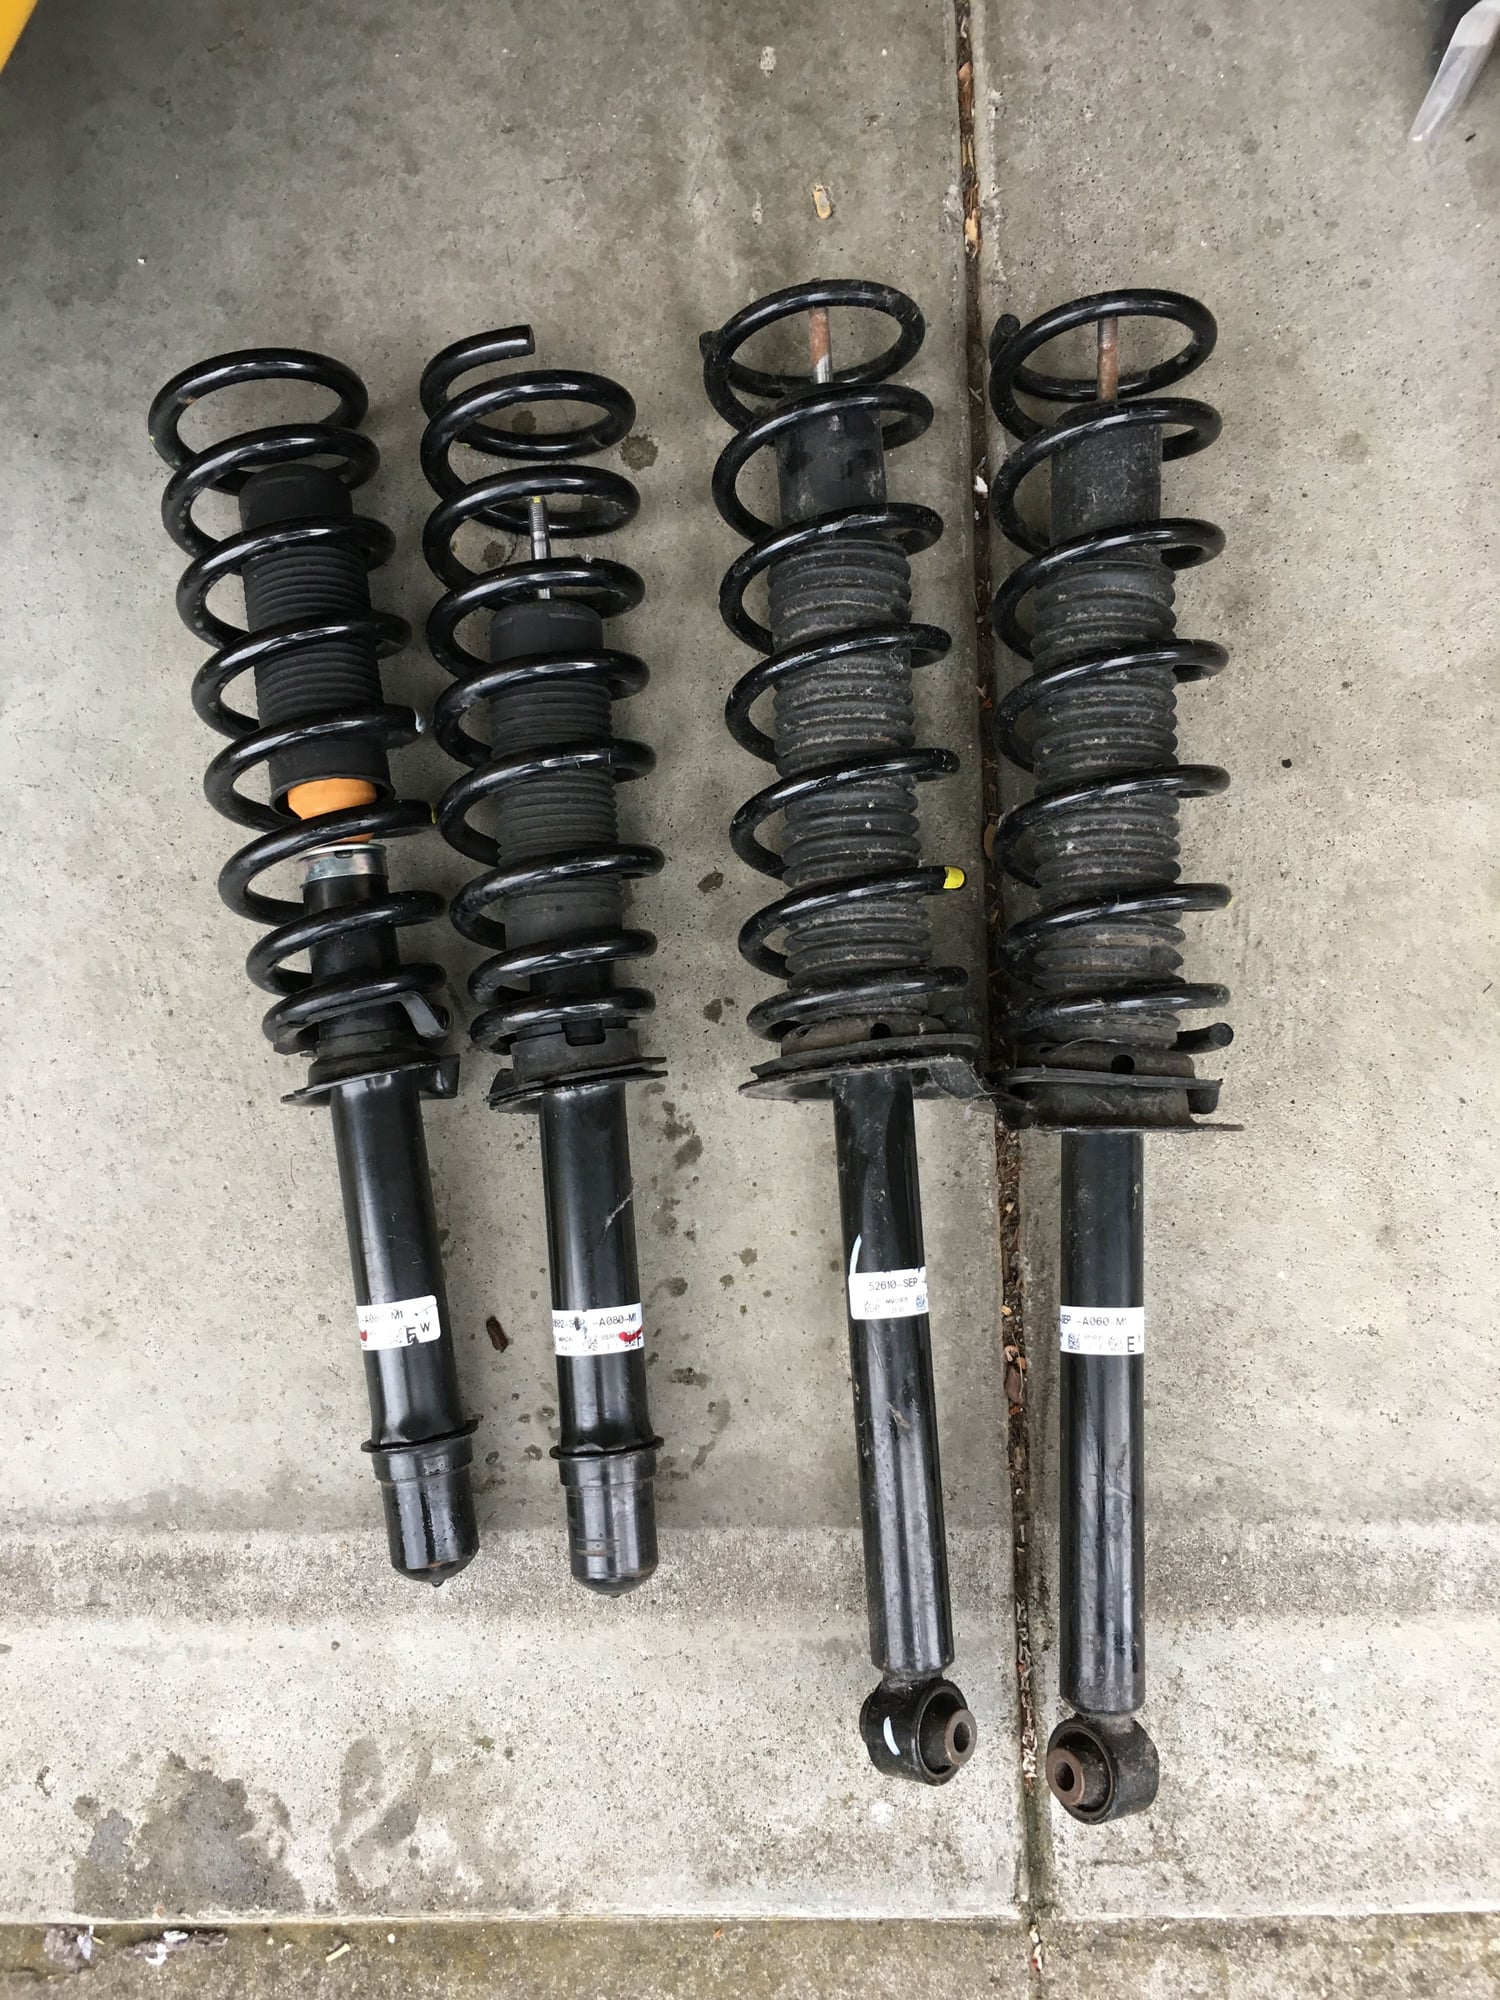 Steering/Suspension - CLOSED: FS: Stock Suspension from 2006 TL 5 speed Auto - Used - 2004 to 2008 Acura TL - South San Francisco, CA 94080, United States